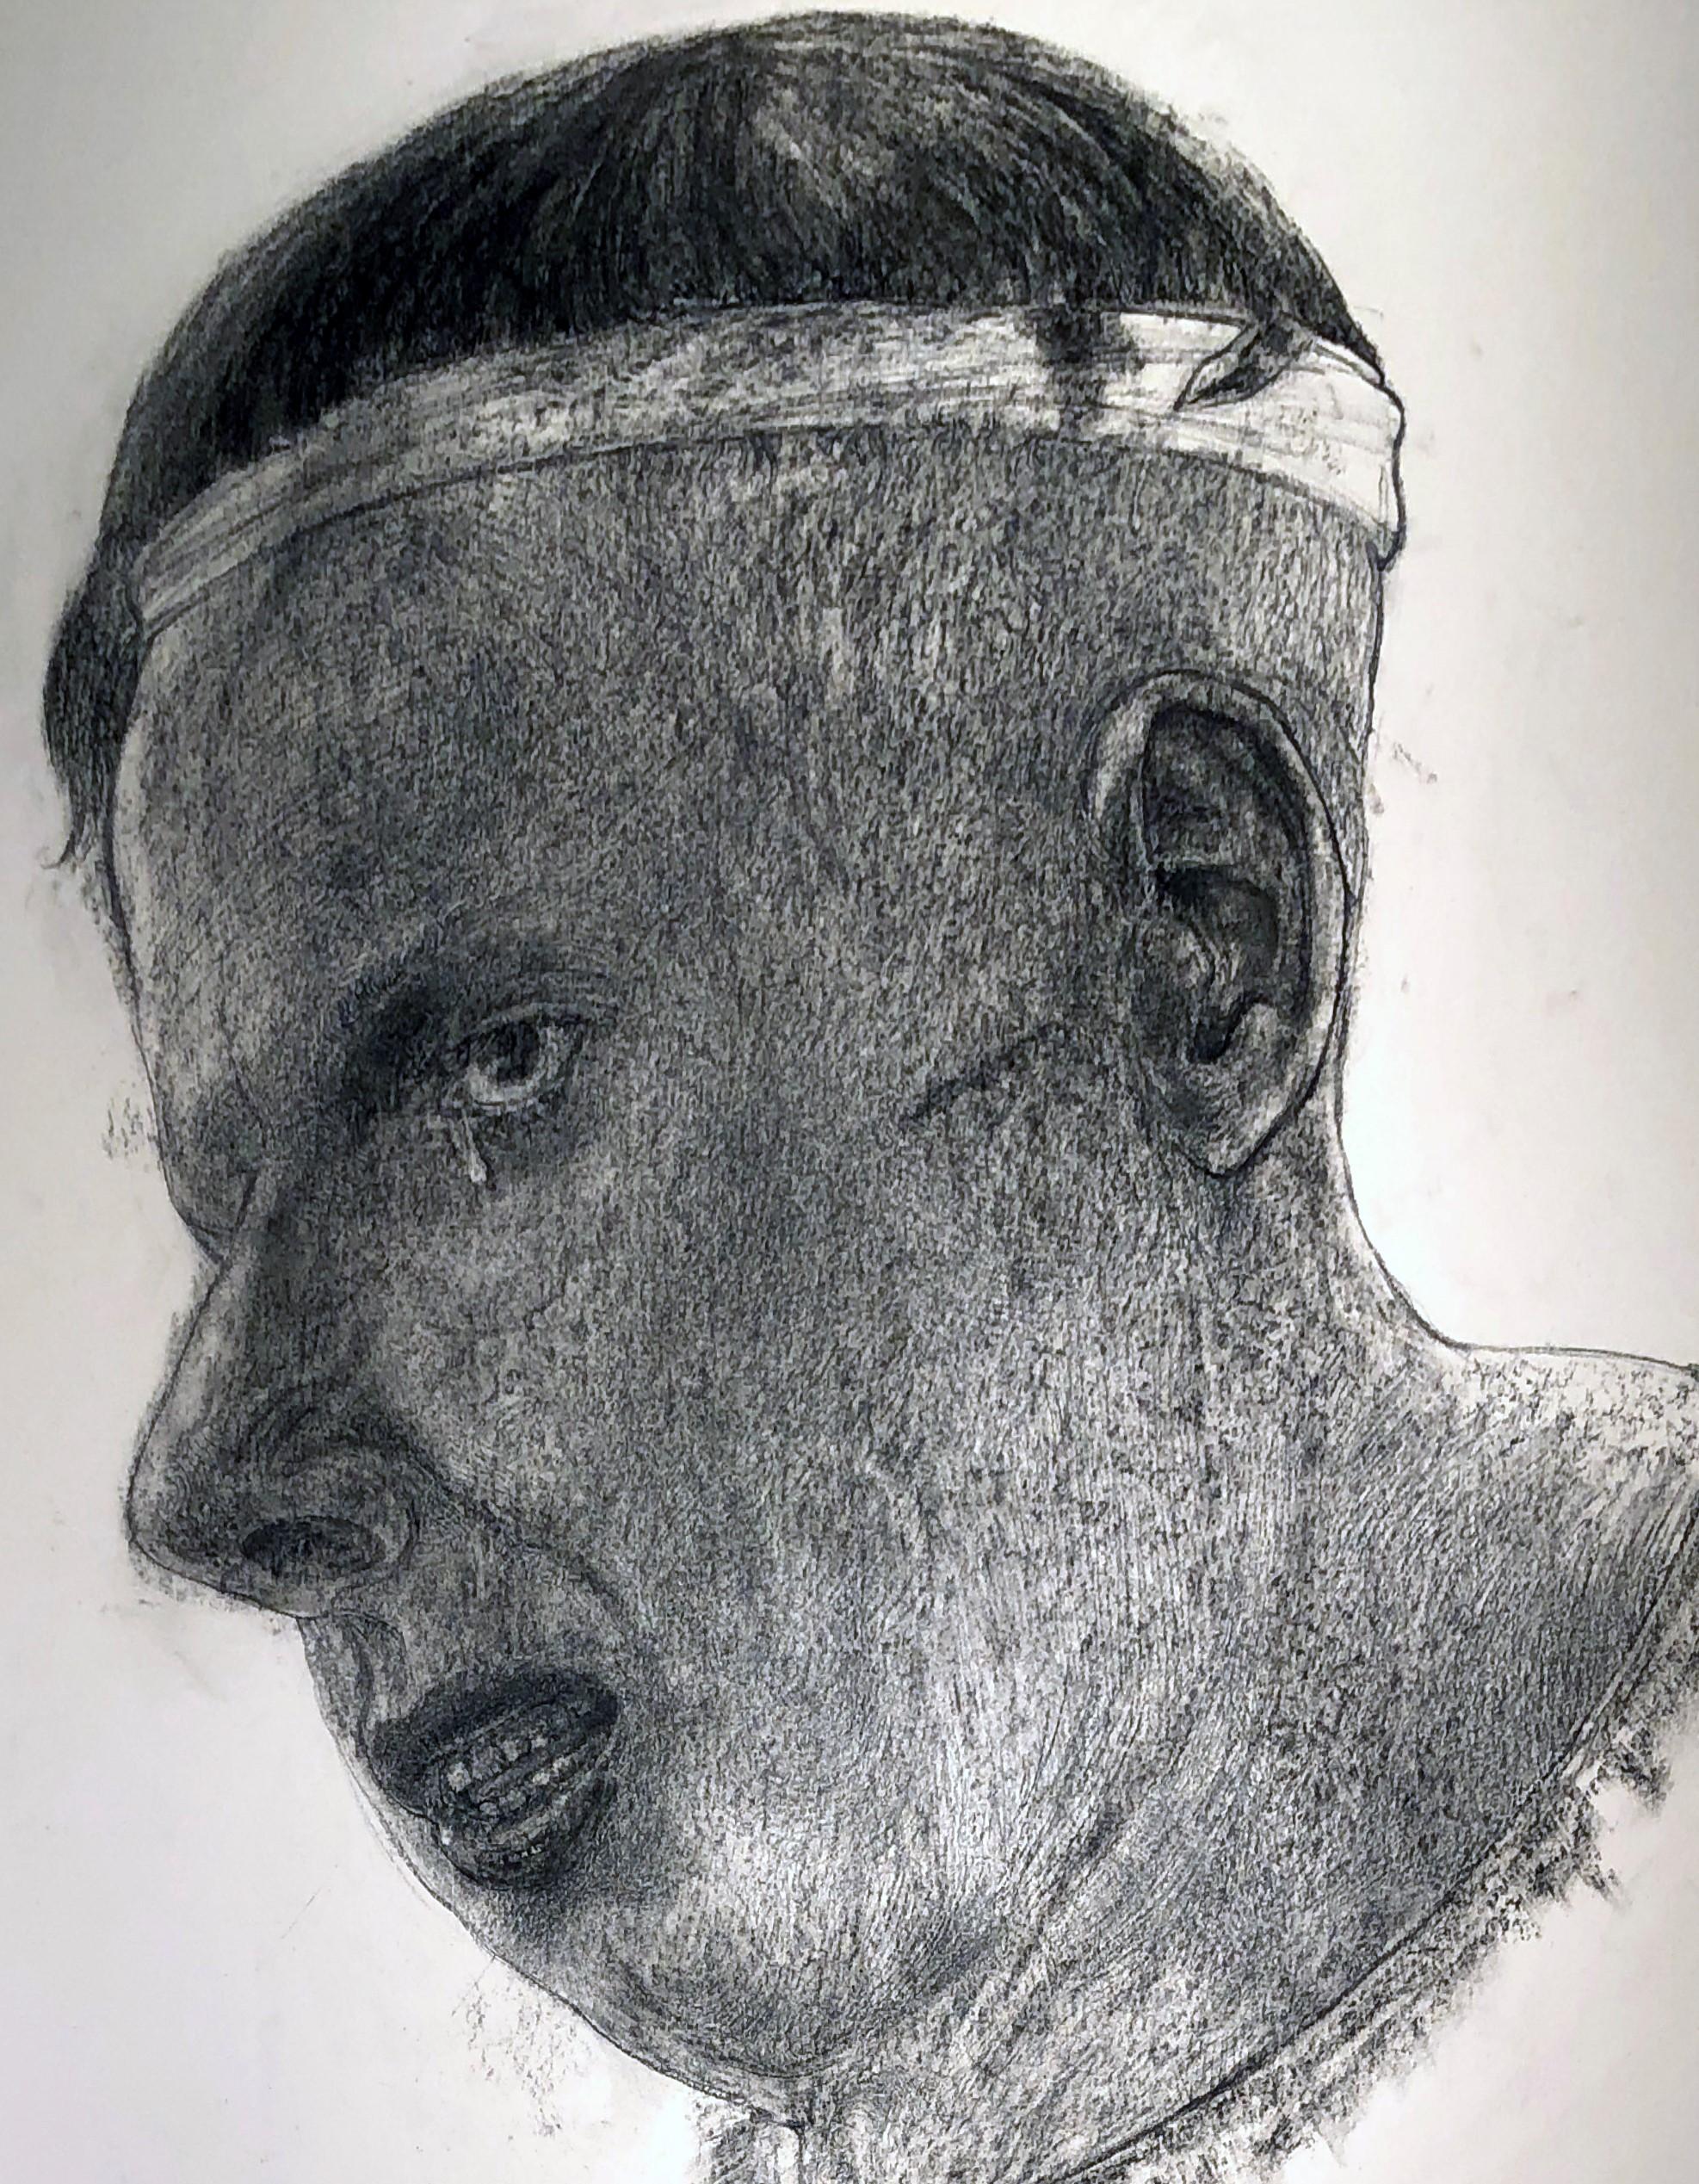 Sweat Band #3, Charcoal Drawing, Bust of a Man Wearing a Sweat Band - Contemporary Art by David Becker